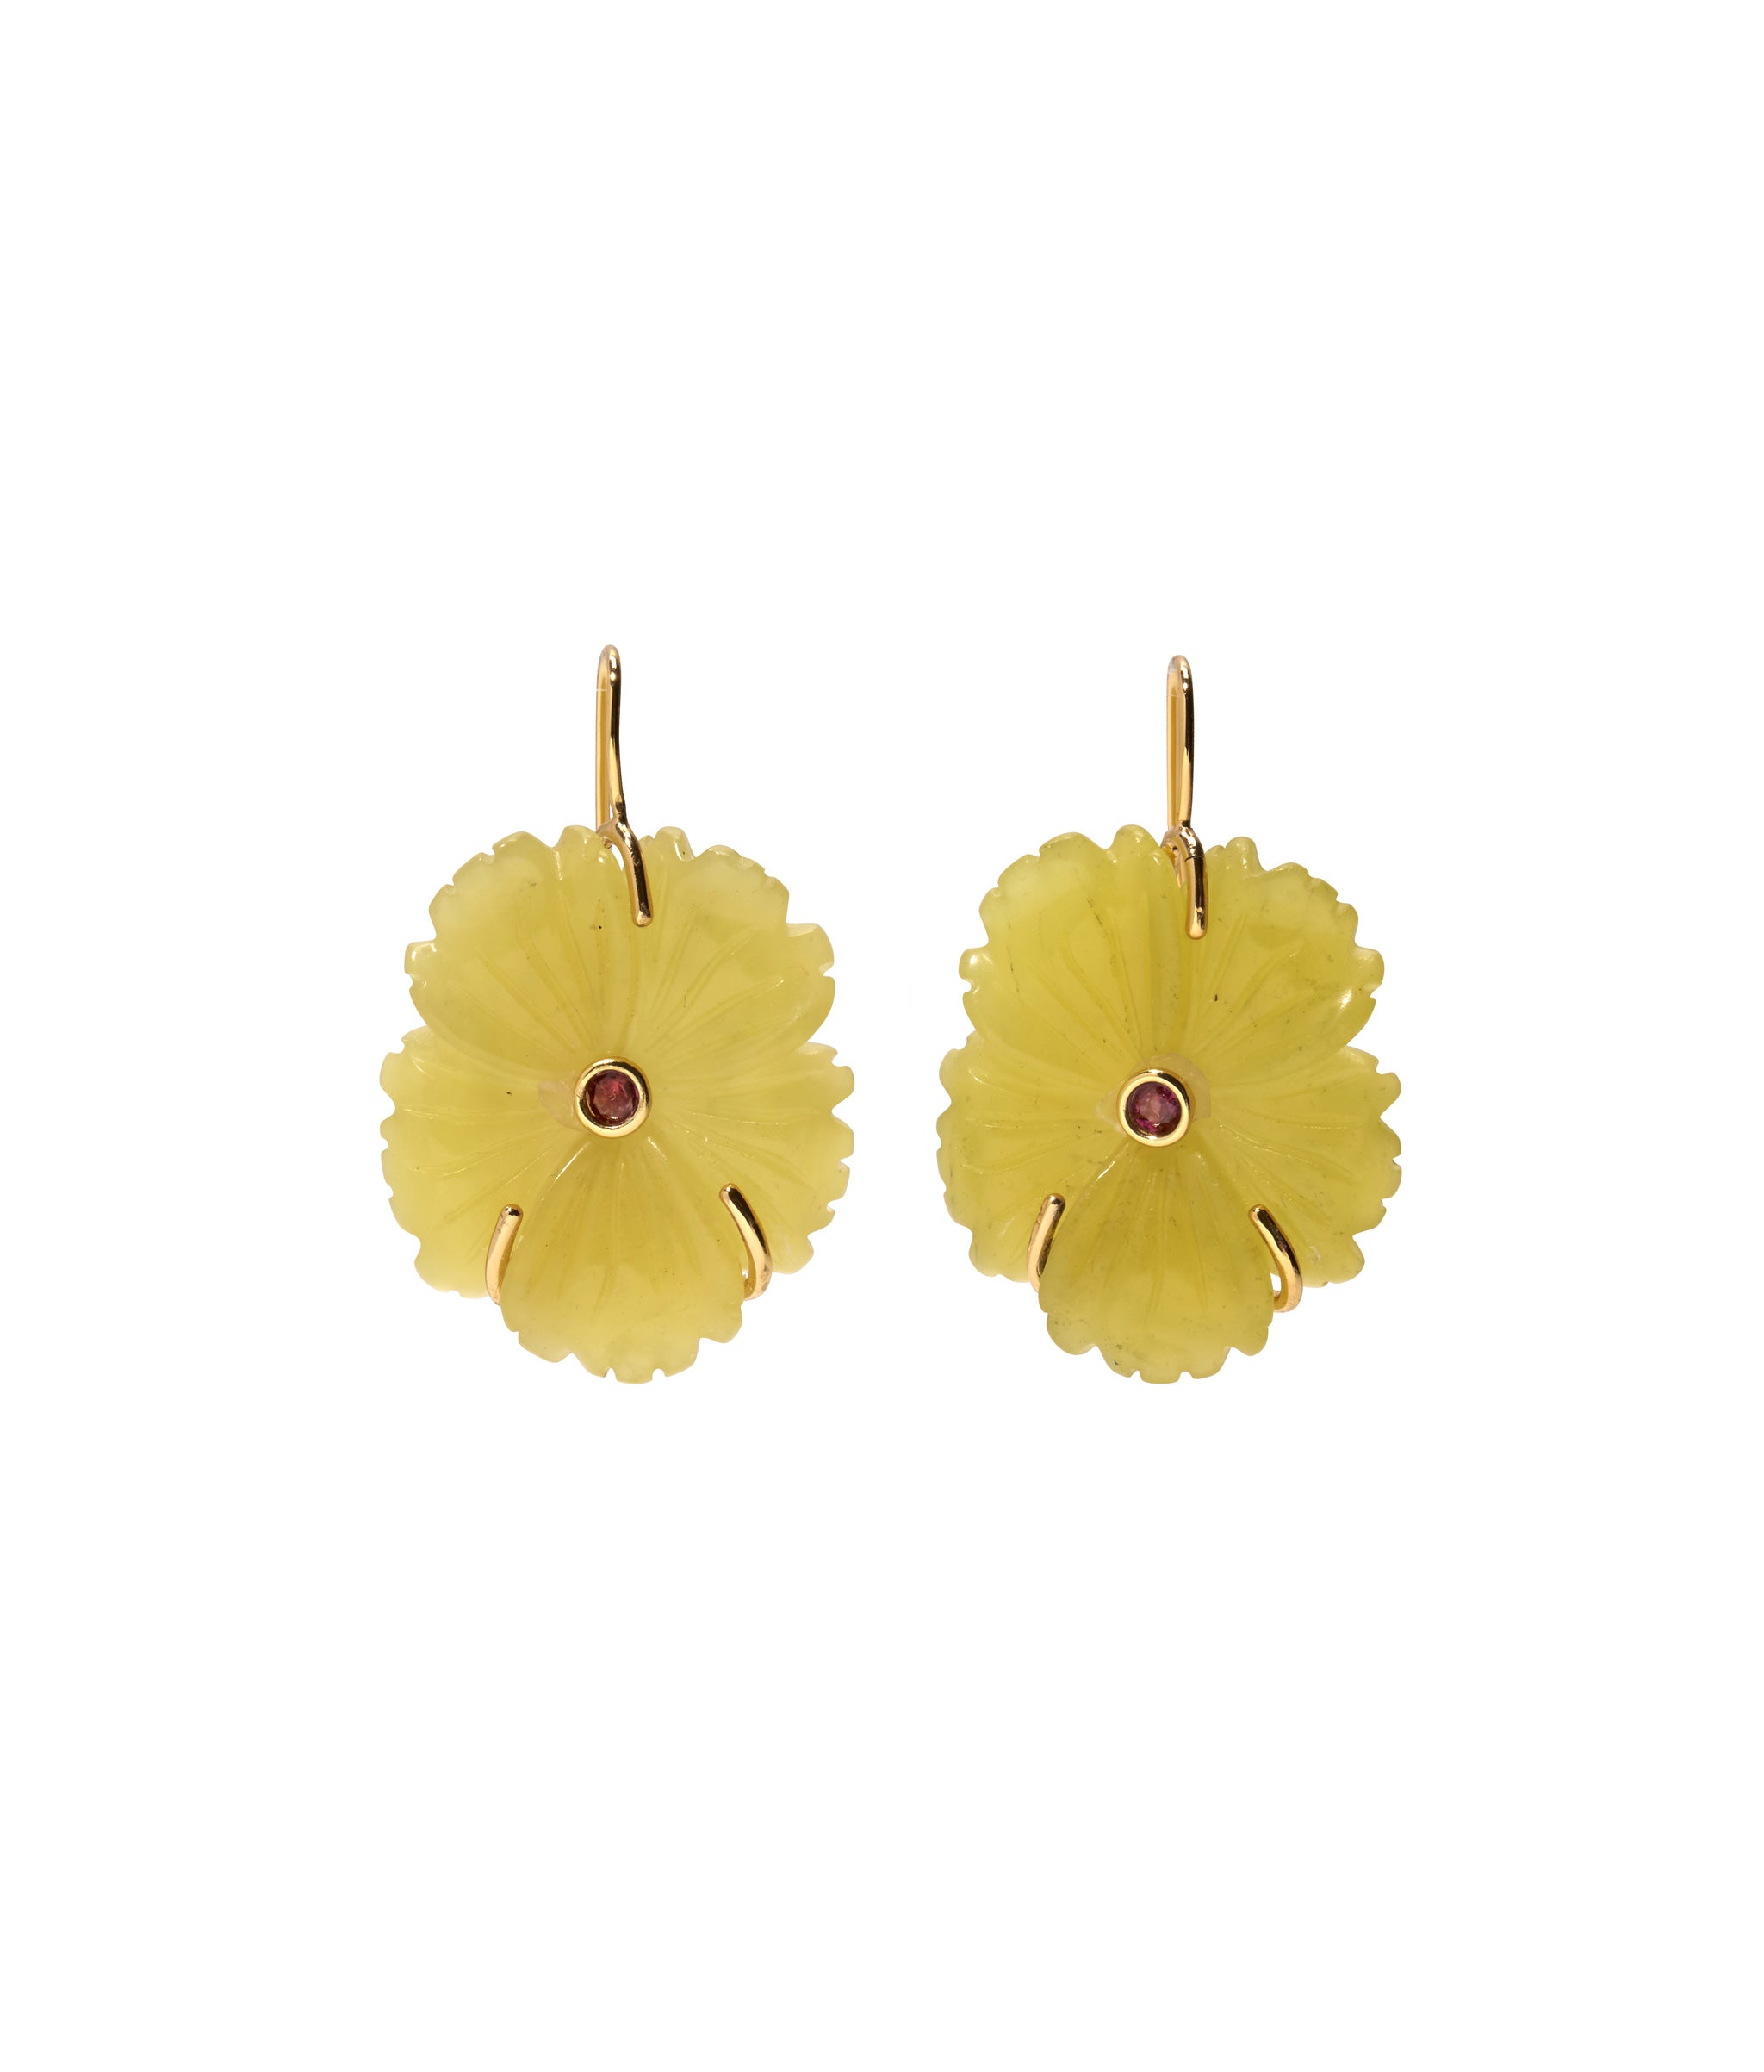 New Bloom Earrings in Canary. Gold-plated ear-wire with carved lemon jade flowers set with faceted rhodolite stones.